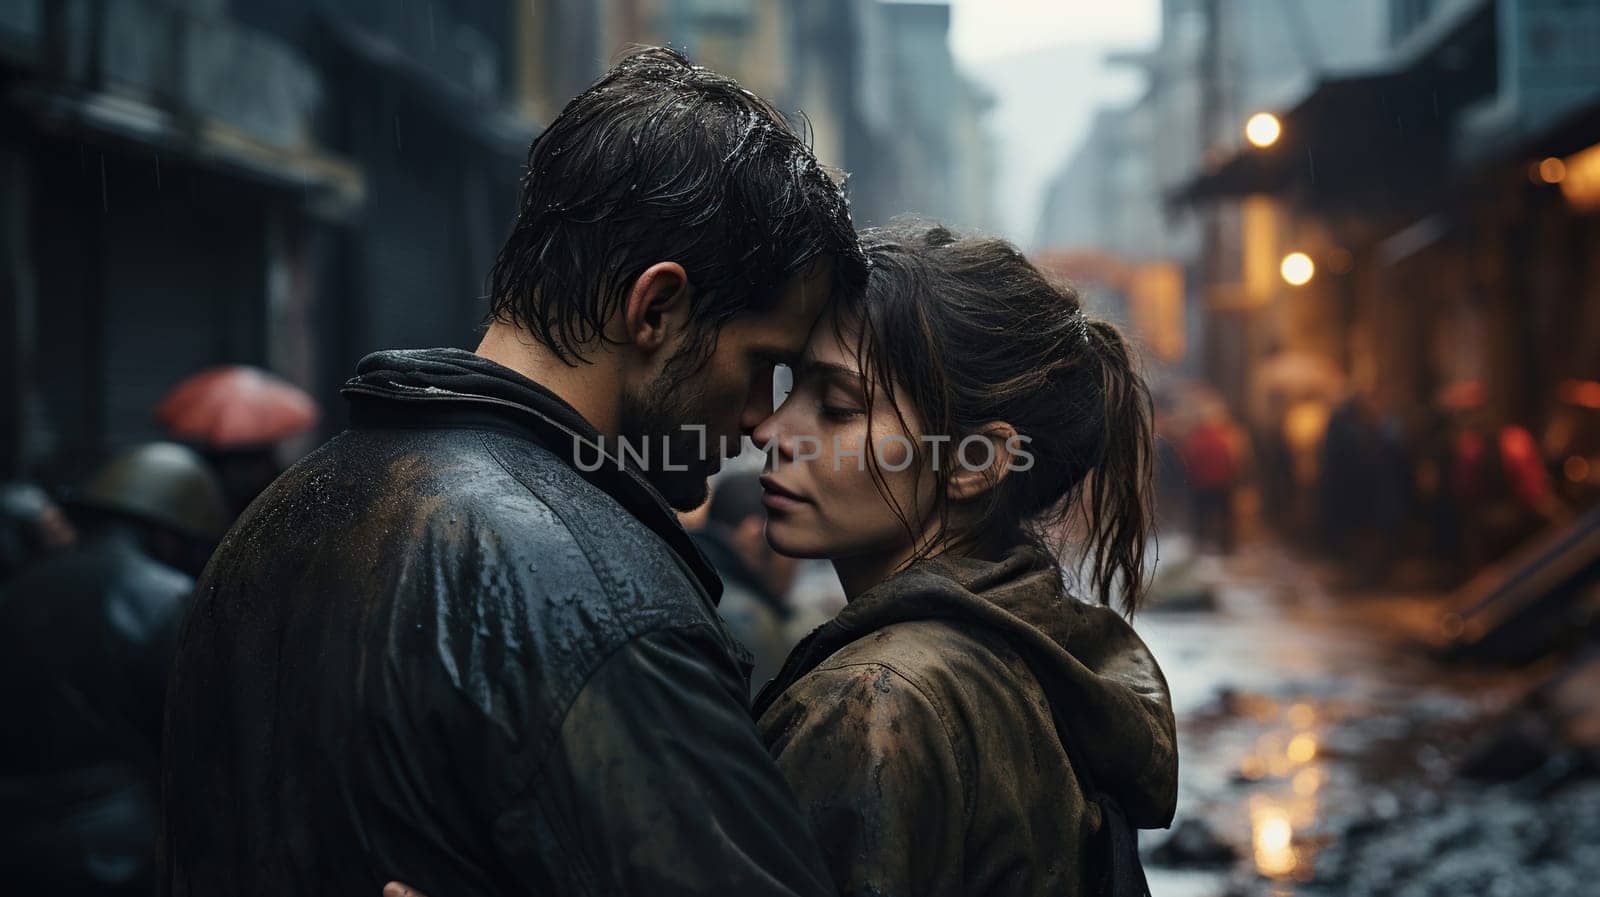 A man hugs a woman against the backdrop of a destroyed city.